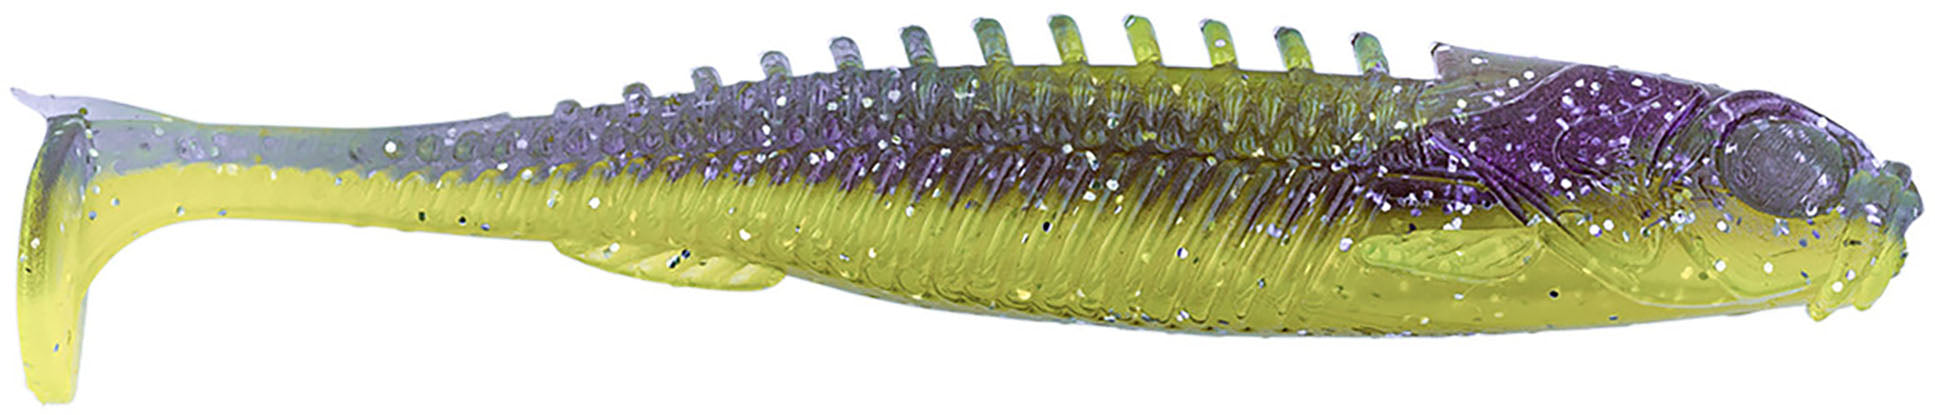 Northland Tackle Eye-Candy Paddle Shad - 5 Pack